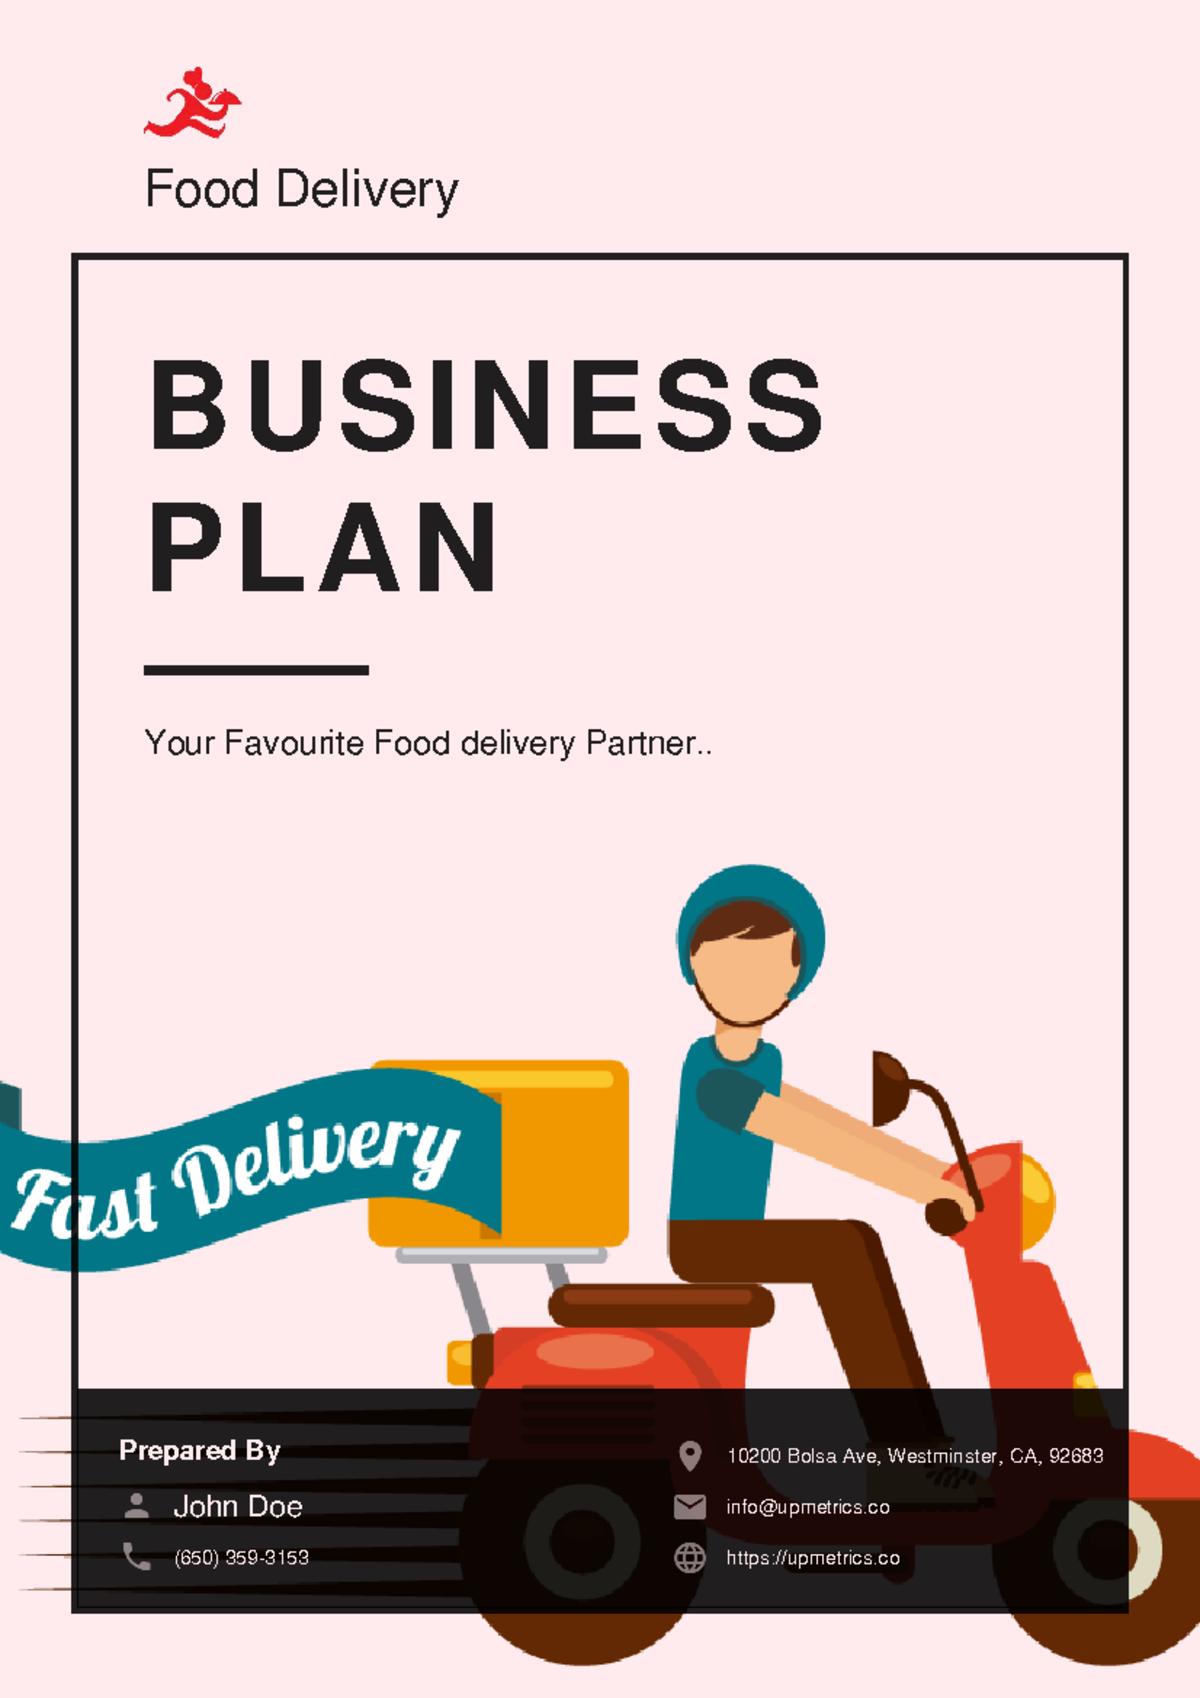 Food delivery business plan example - Food Delivery BUSINESS PLAN Your ...